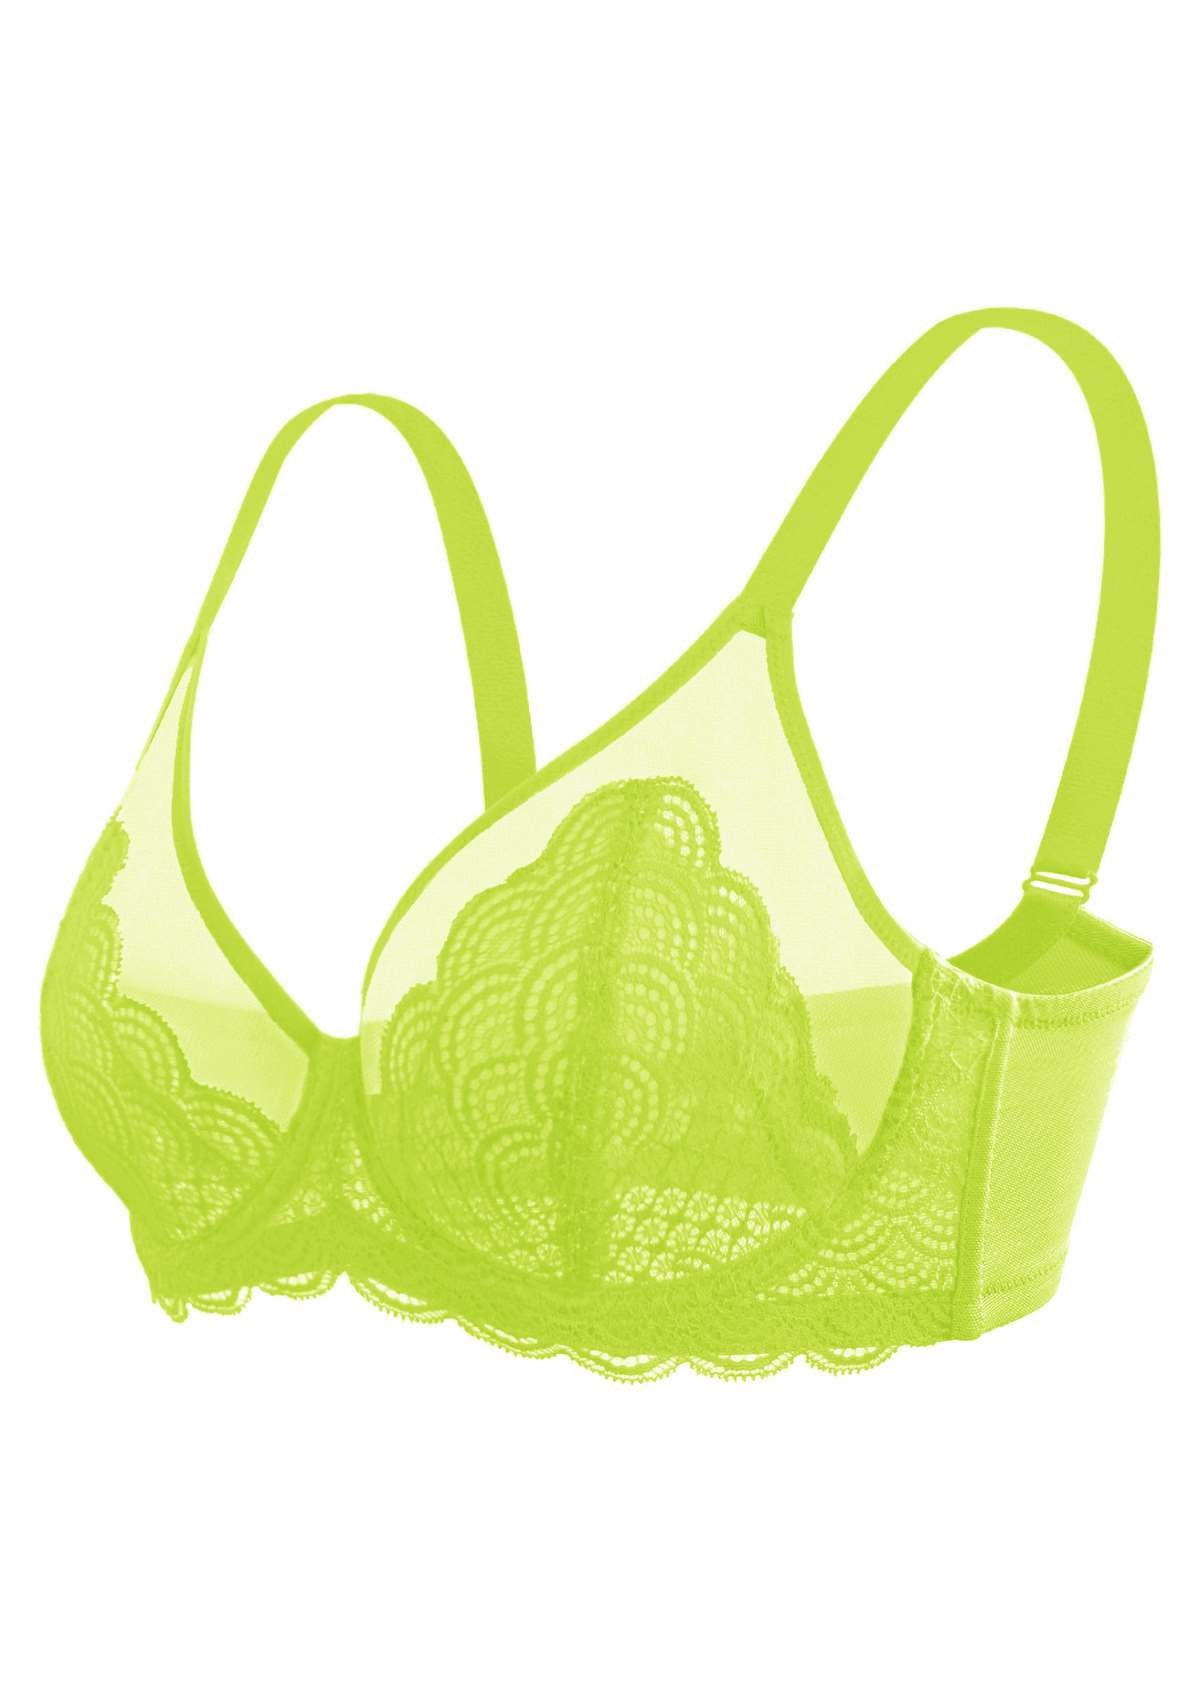 HSIA Mermaid Scales Sheer Lace Bra: Unlined Full Coverage Wired Bra - Lime Green / 34 / C